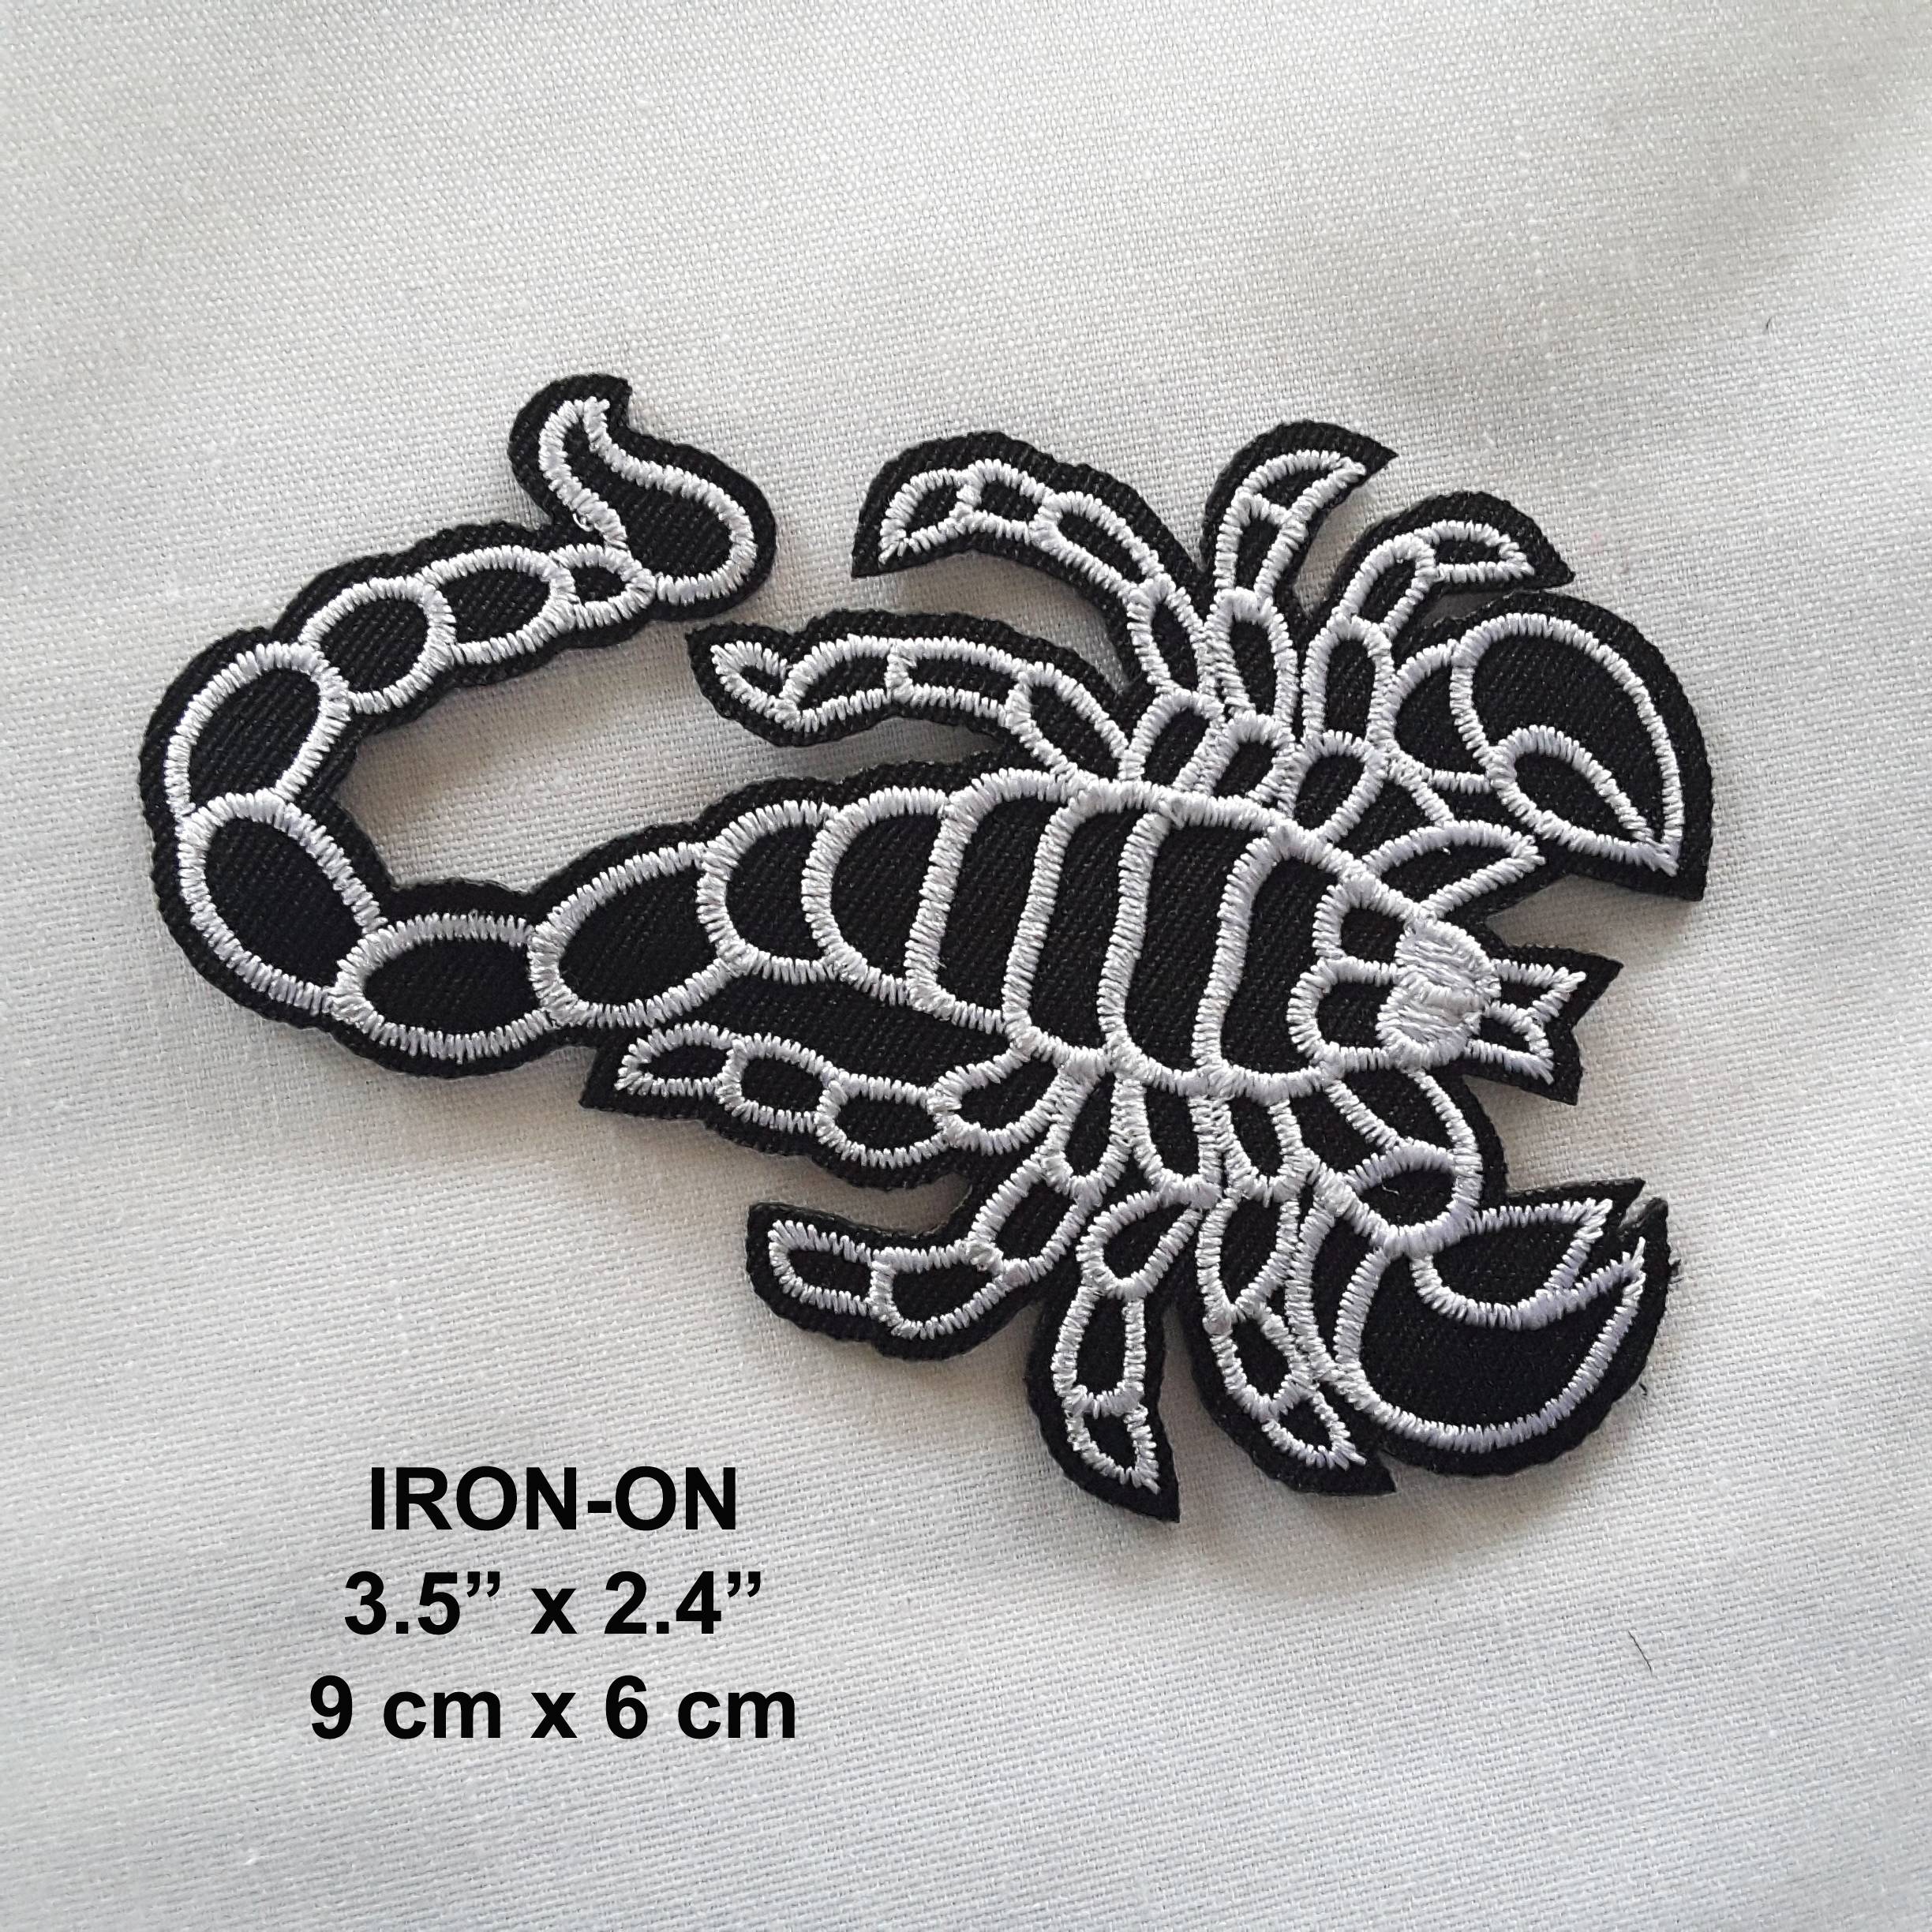 Red and White Scorpion Logo - Set of 2 Red White Black Scorpion Embroidered Iron-On Patch ...